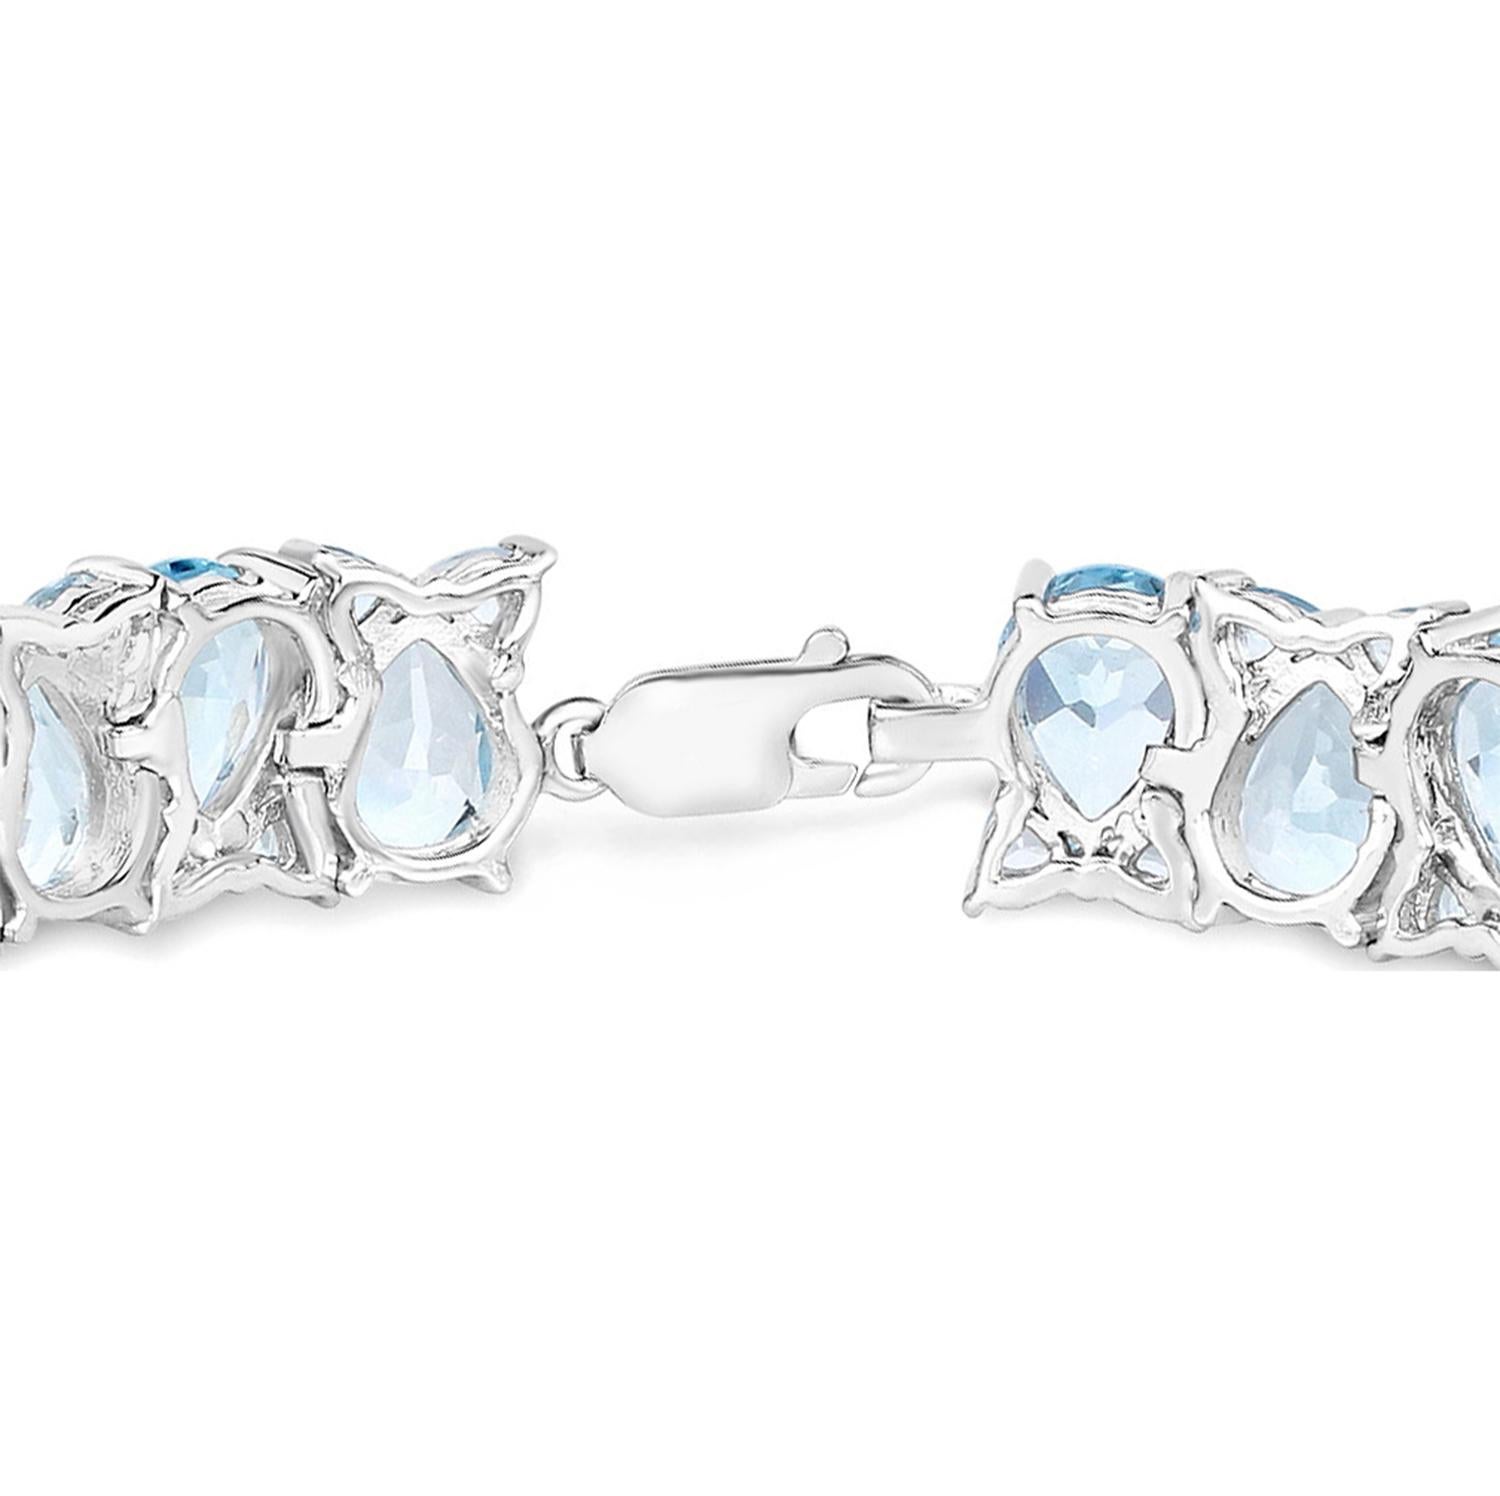 Blue Topaz Tennis Bracelet 58.76 Carats Rhodium Plated Sterling Silver In Excellent Condition For Sale In Laguna Niguel, CA